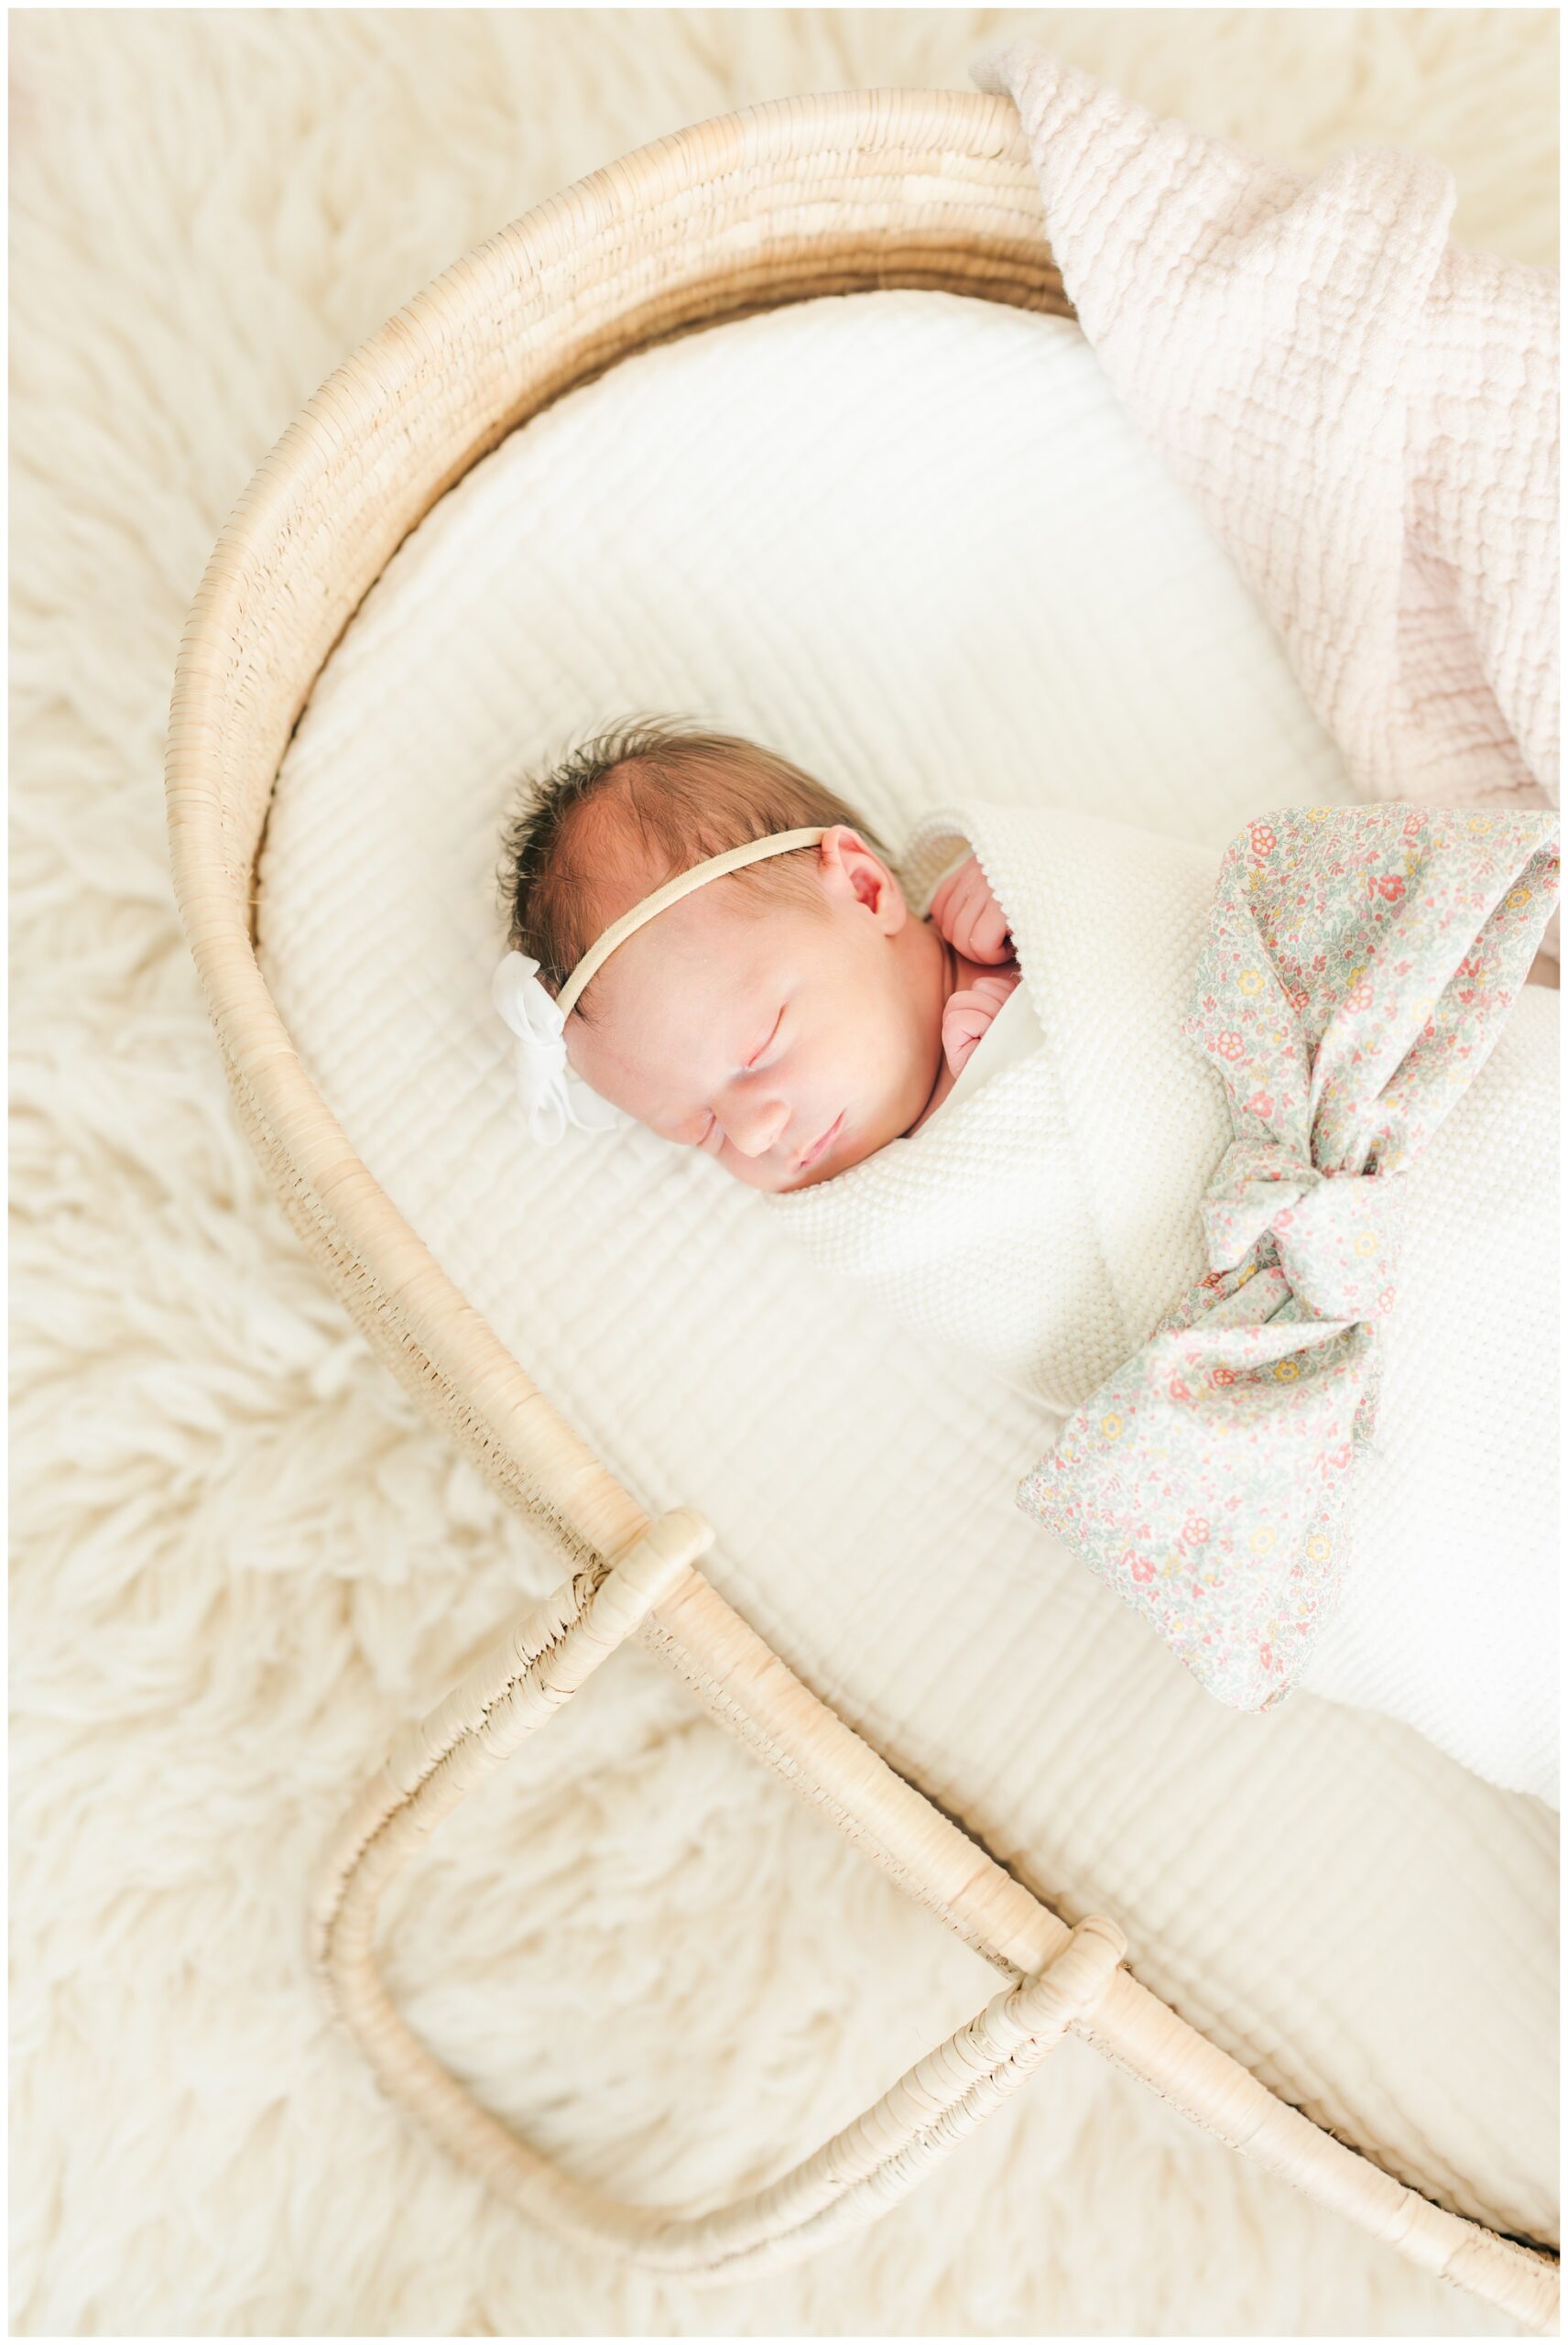 Newborn Photography in The Woodlands, Texas, baby girl swaddled in basket with blanket textures.